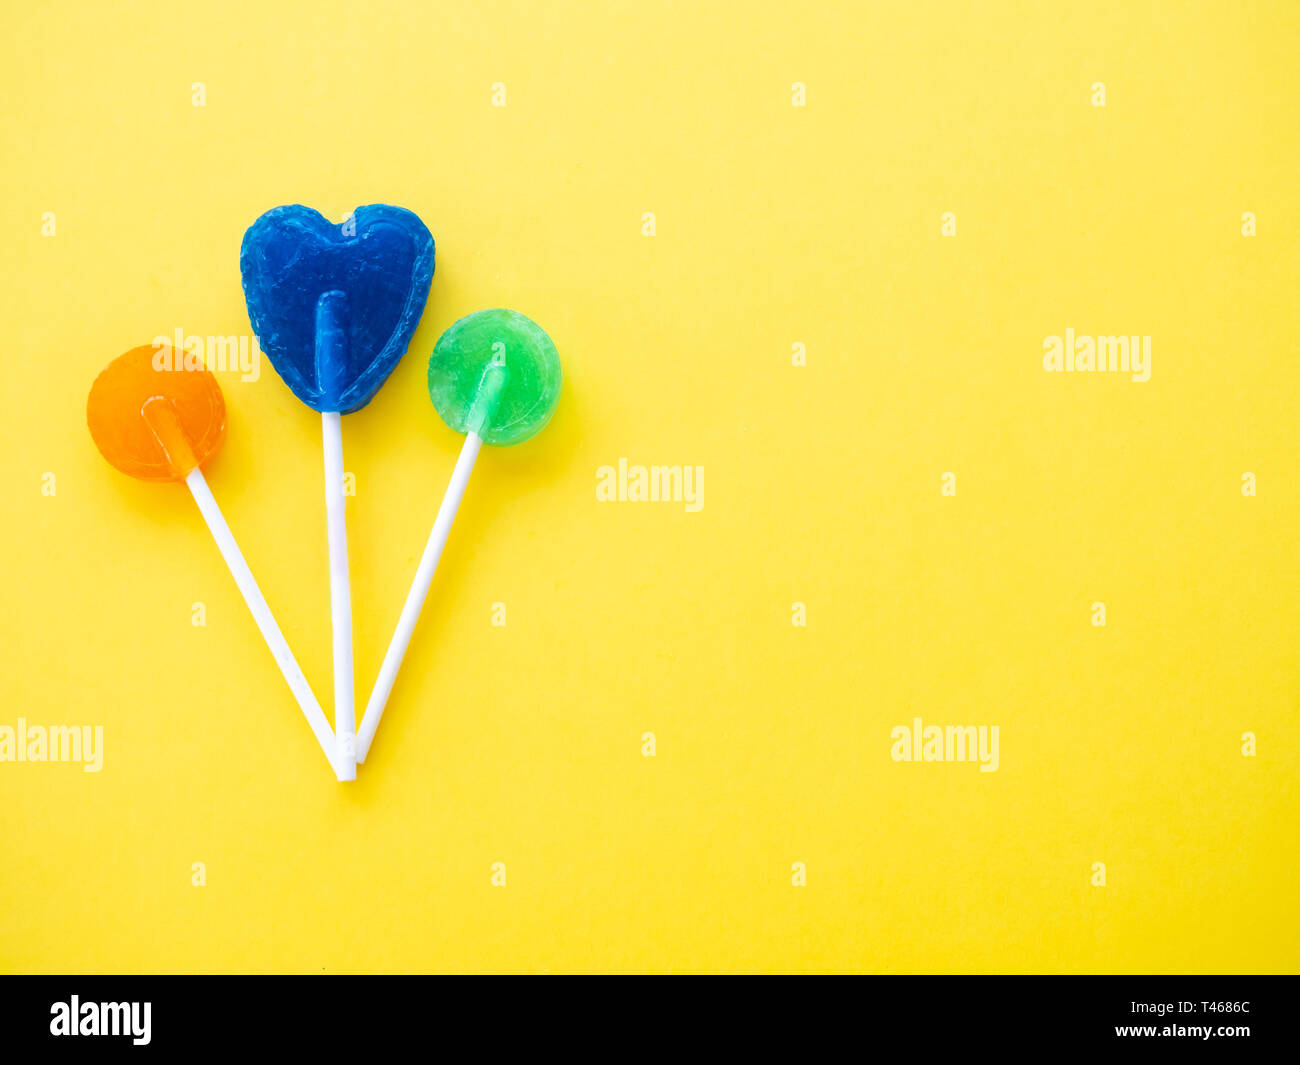 Several lollipops on a yellow background Stock Photo